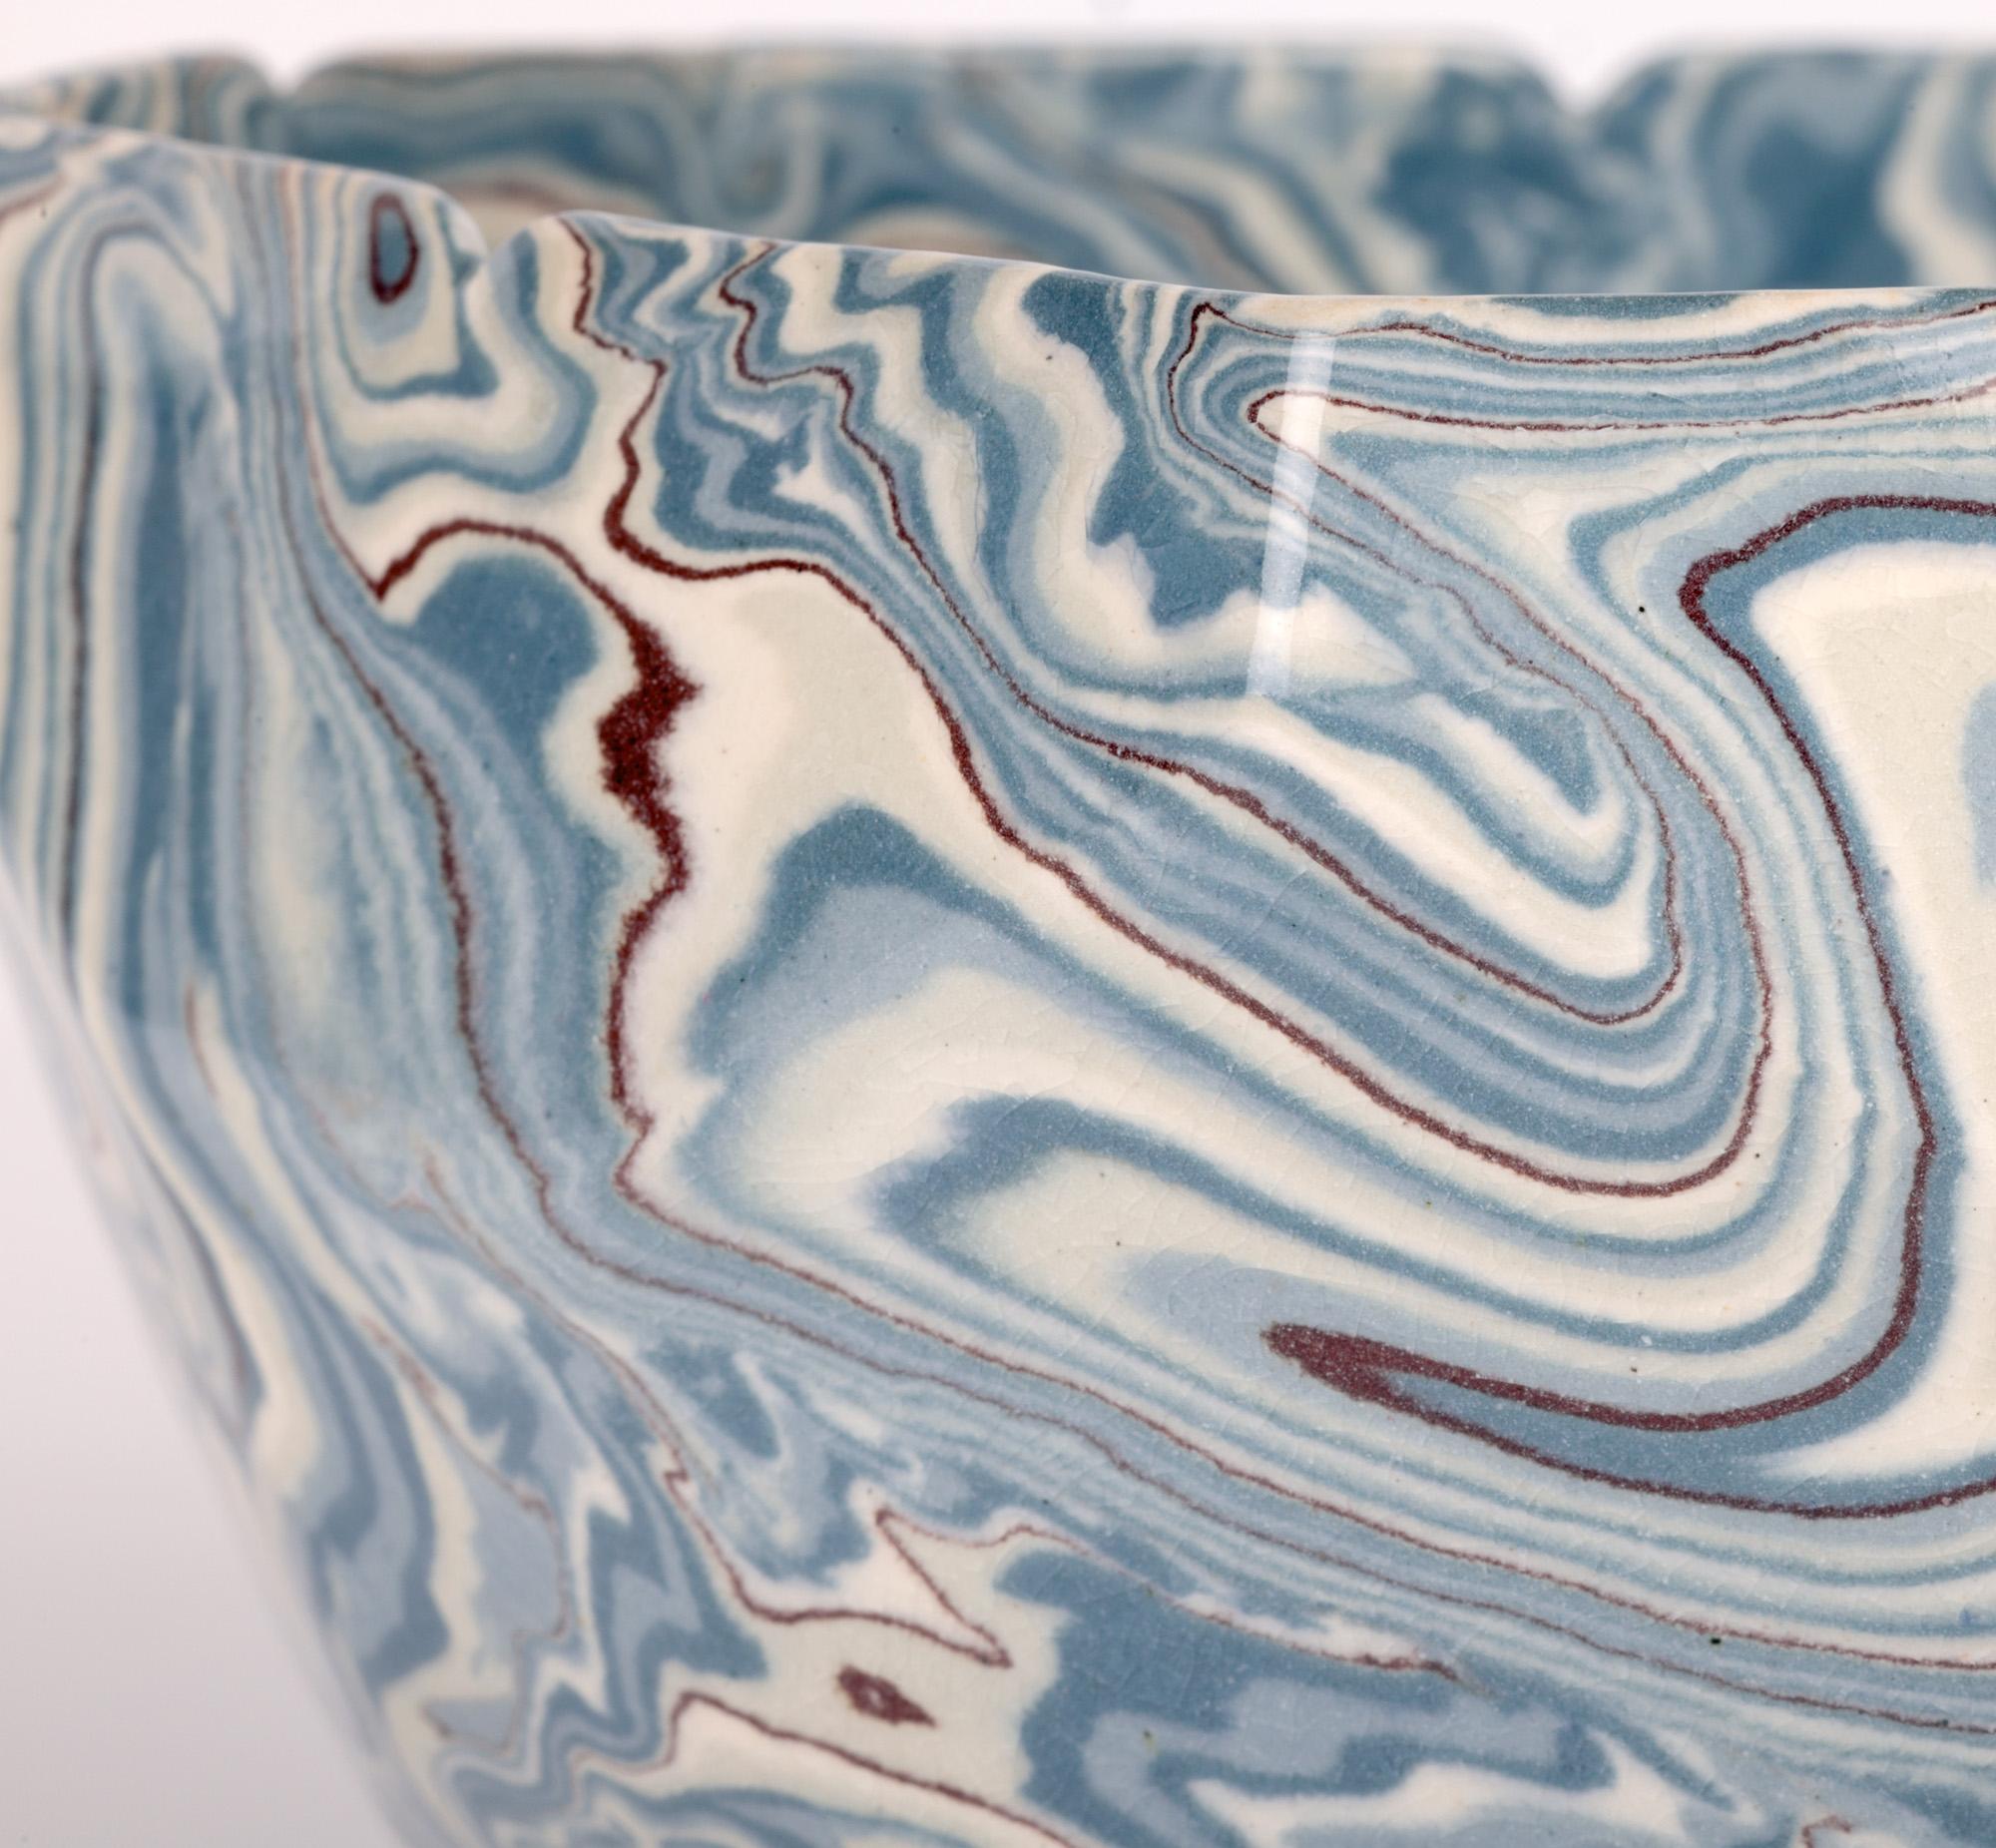 A rare and very stylish Doulton Lambeth Marqueterie Ware blue marbled art pottery bowl by Lambeth’s first Art Director Wilton Parker Rix (Doulton Lambeth 1868-1897) and dating from around 1895. 

Rix became a trainee manager at Doulton Lambeth in